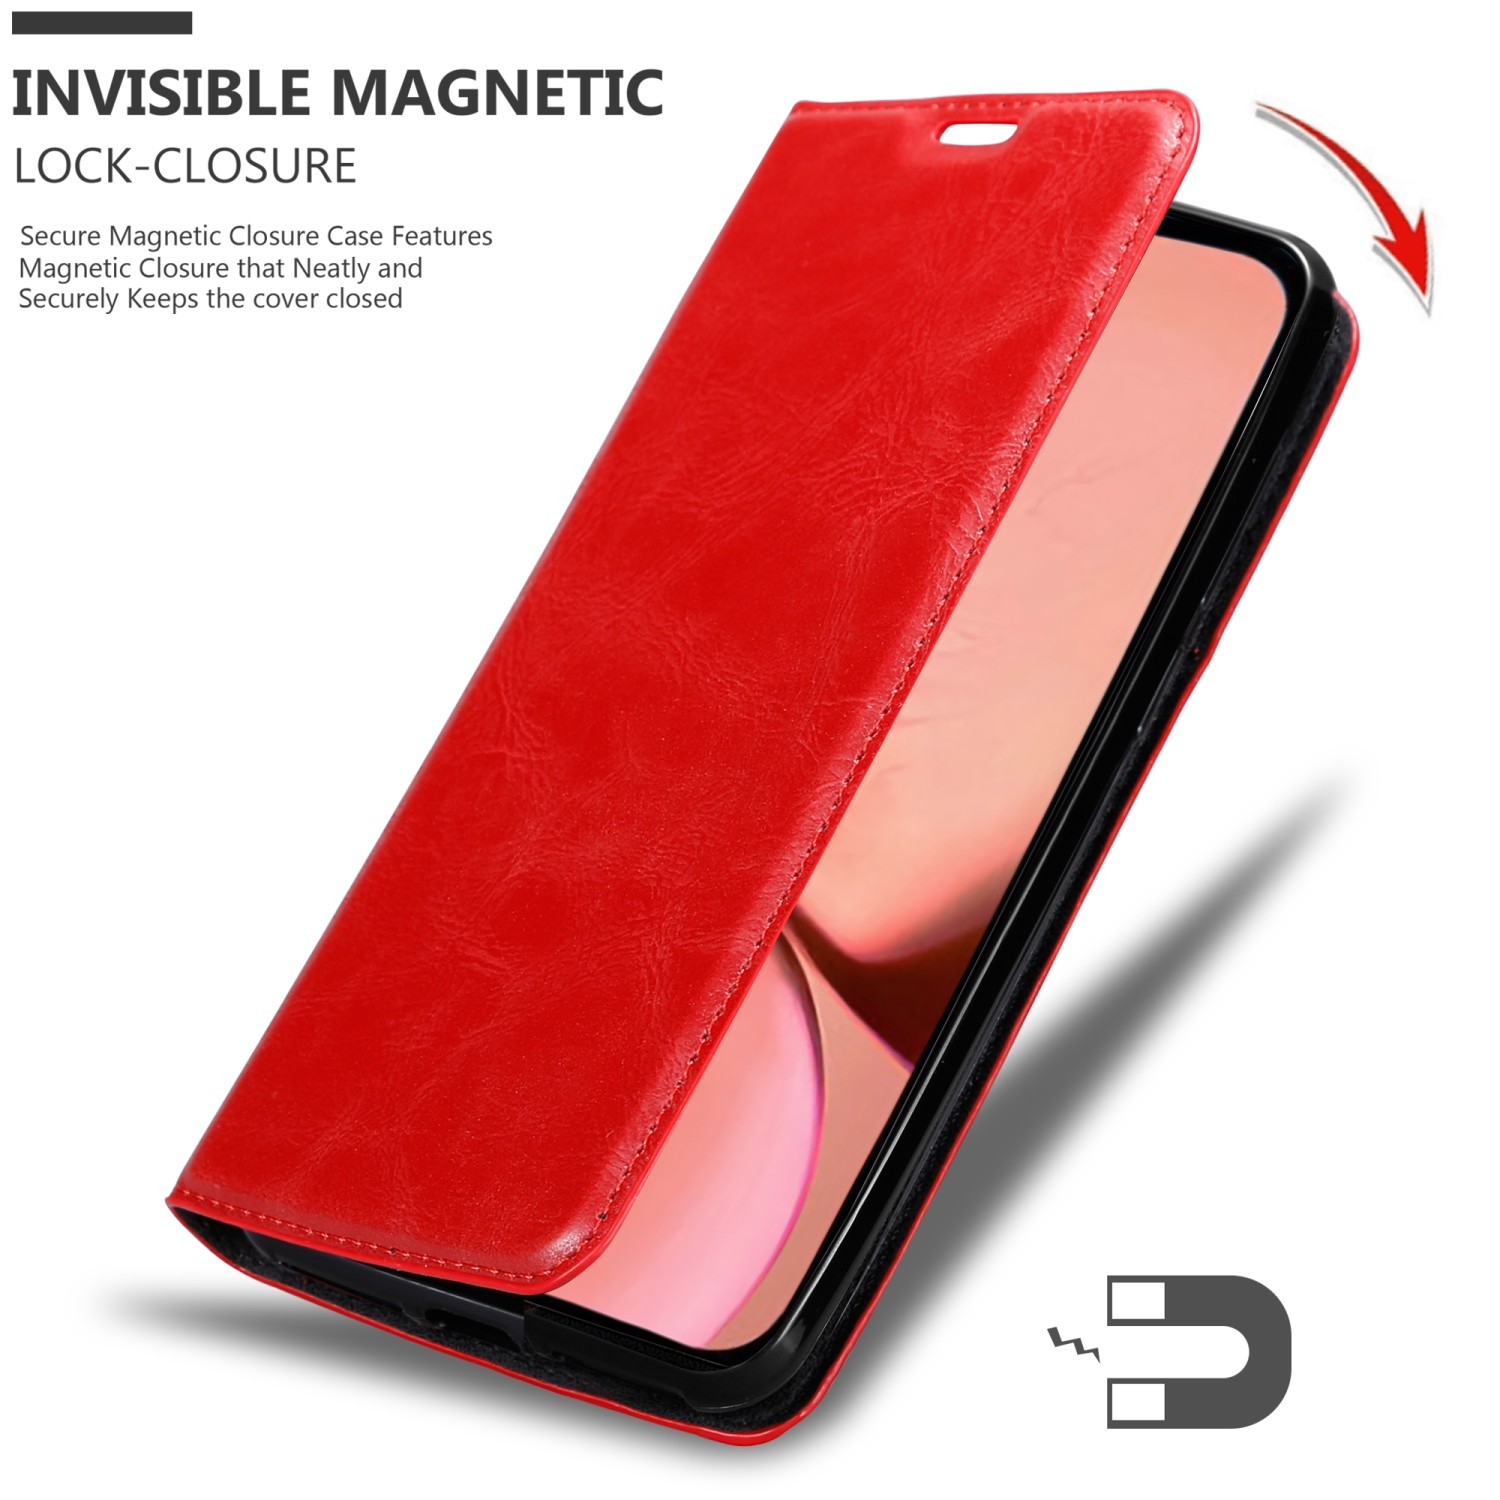 13 Invisible Hülle ROT APFEL PRO, Bookcover, Book Magnet, Apple, CADORABO iPhone